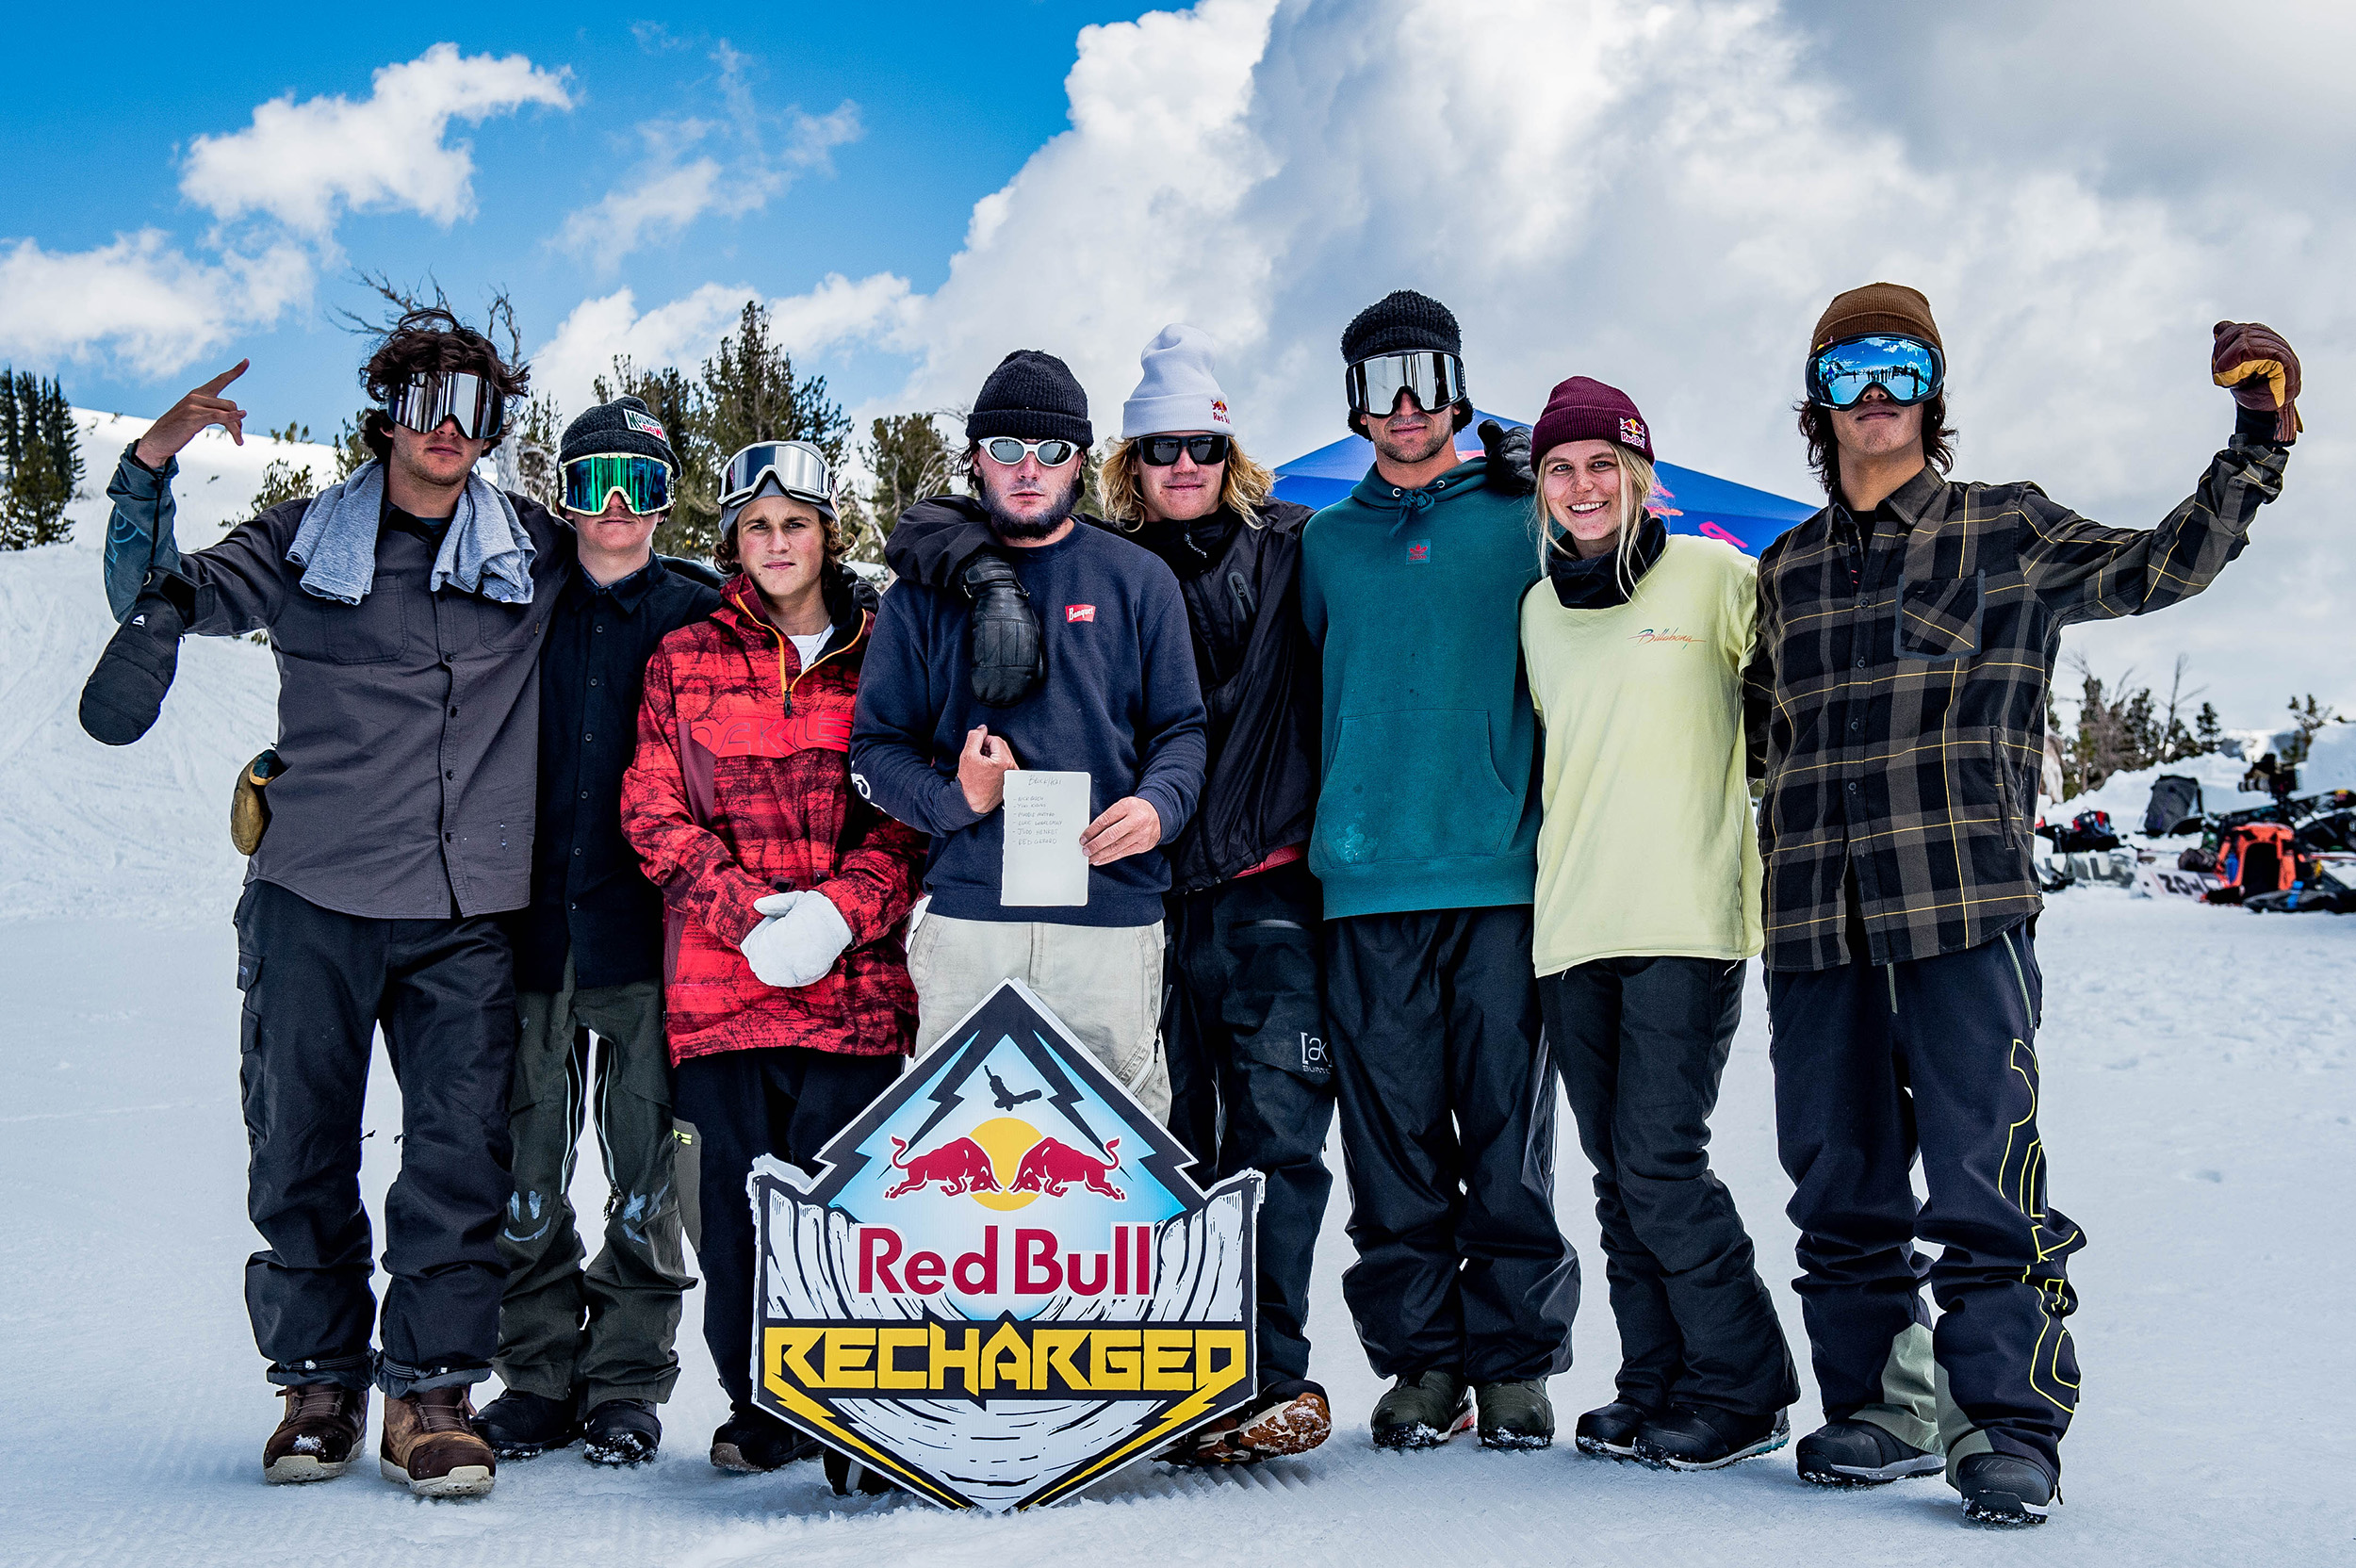 toonhoogte Spelling Mount Bank Red Bull Recharged 2019 - The Snowboarders Journal